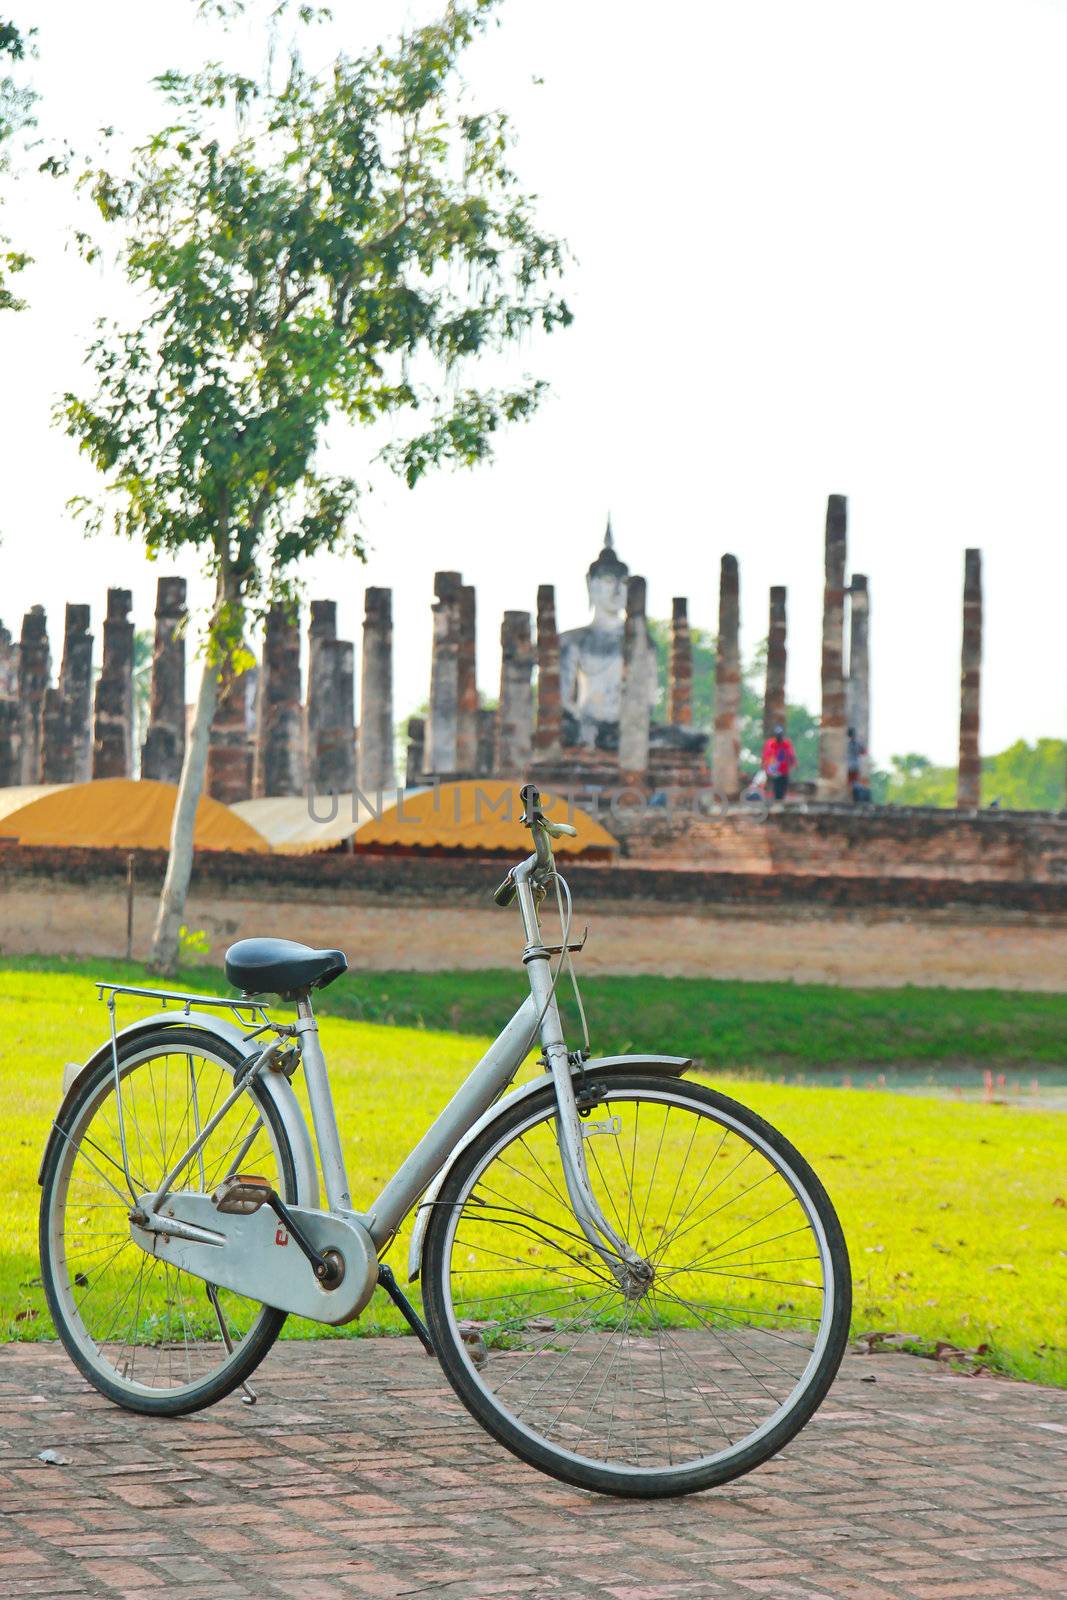 A bicycle in Sukhothai historical park, Thailand